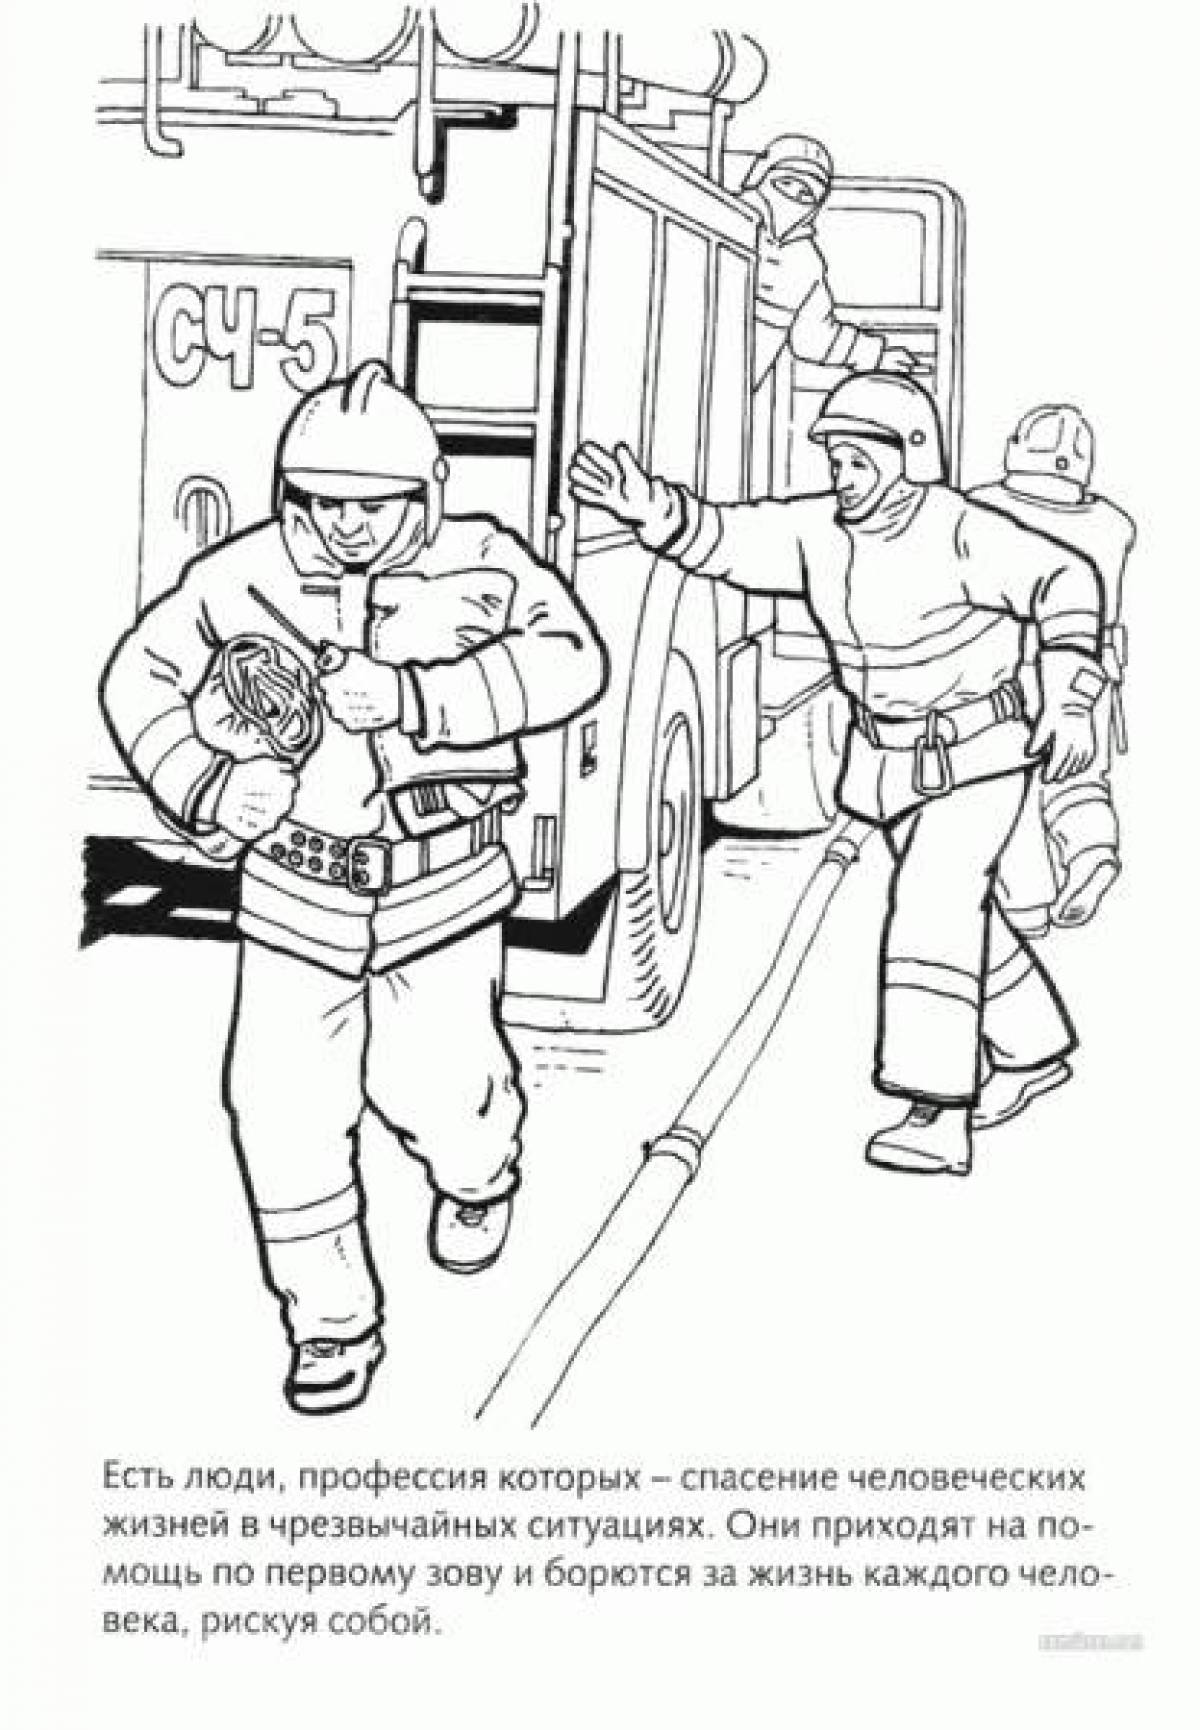 Coloring joyful Ministry of Emergency Situations